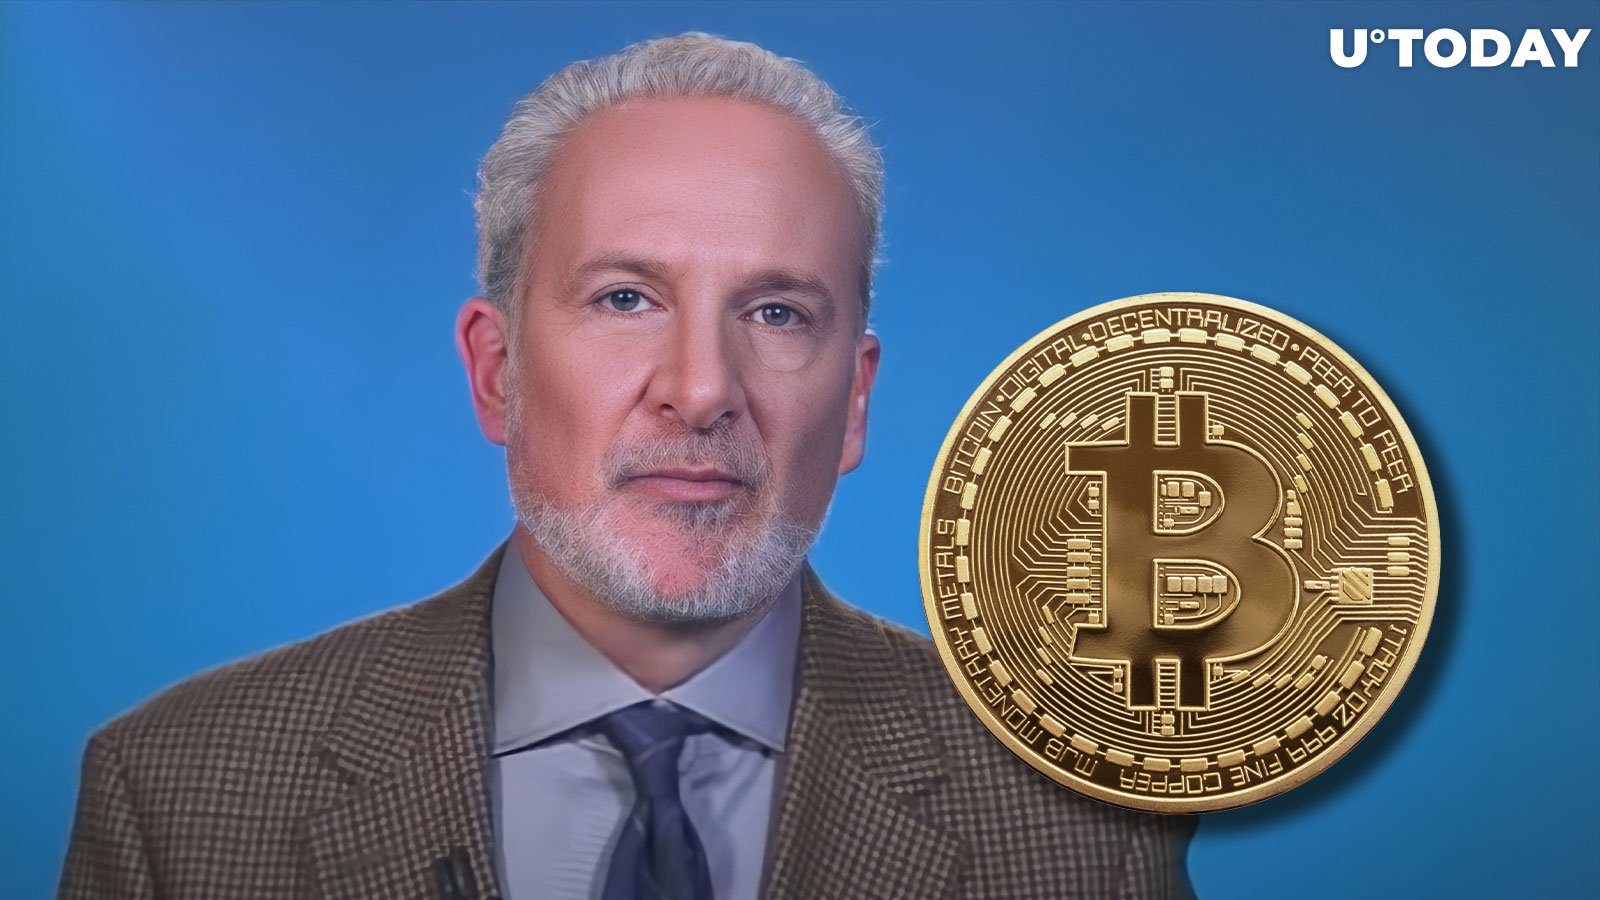 Bitcoin (BTC) Hater Peter Schiff Claims Crypto Investors Should Cash Out After 30% Rally